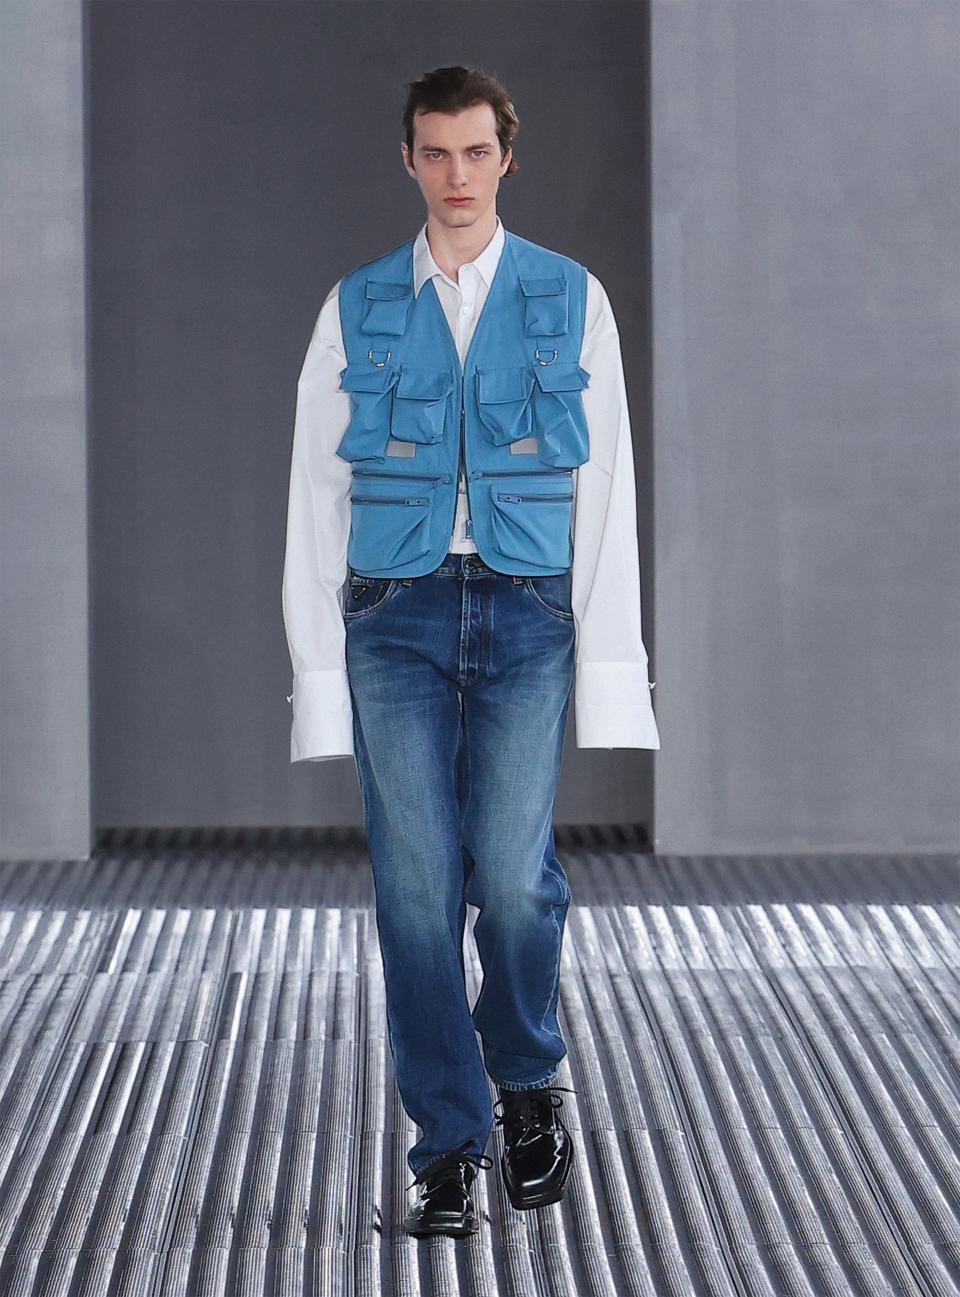 If Prada’s trend-setting history is any indication, the reporter vest—realized here in panama cotton—is about to be everywhere. Miuccia Prada and Raf Simons love to mess with ideas of formality. Paired with the vest and jeans, this white poplin maxi-cuff tuxedo shirt is completely recontextualized. These Japanese denim jeans, worn-in with a regular straight cut, speak to the designers’ sense of restraint. Mrs. Prada, who has long found style in ugliness, has practically single-handedly brought the square-toe dress shoe back into fashion. These derbies in black brushed leather are quintessential Prada.